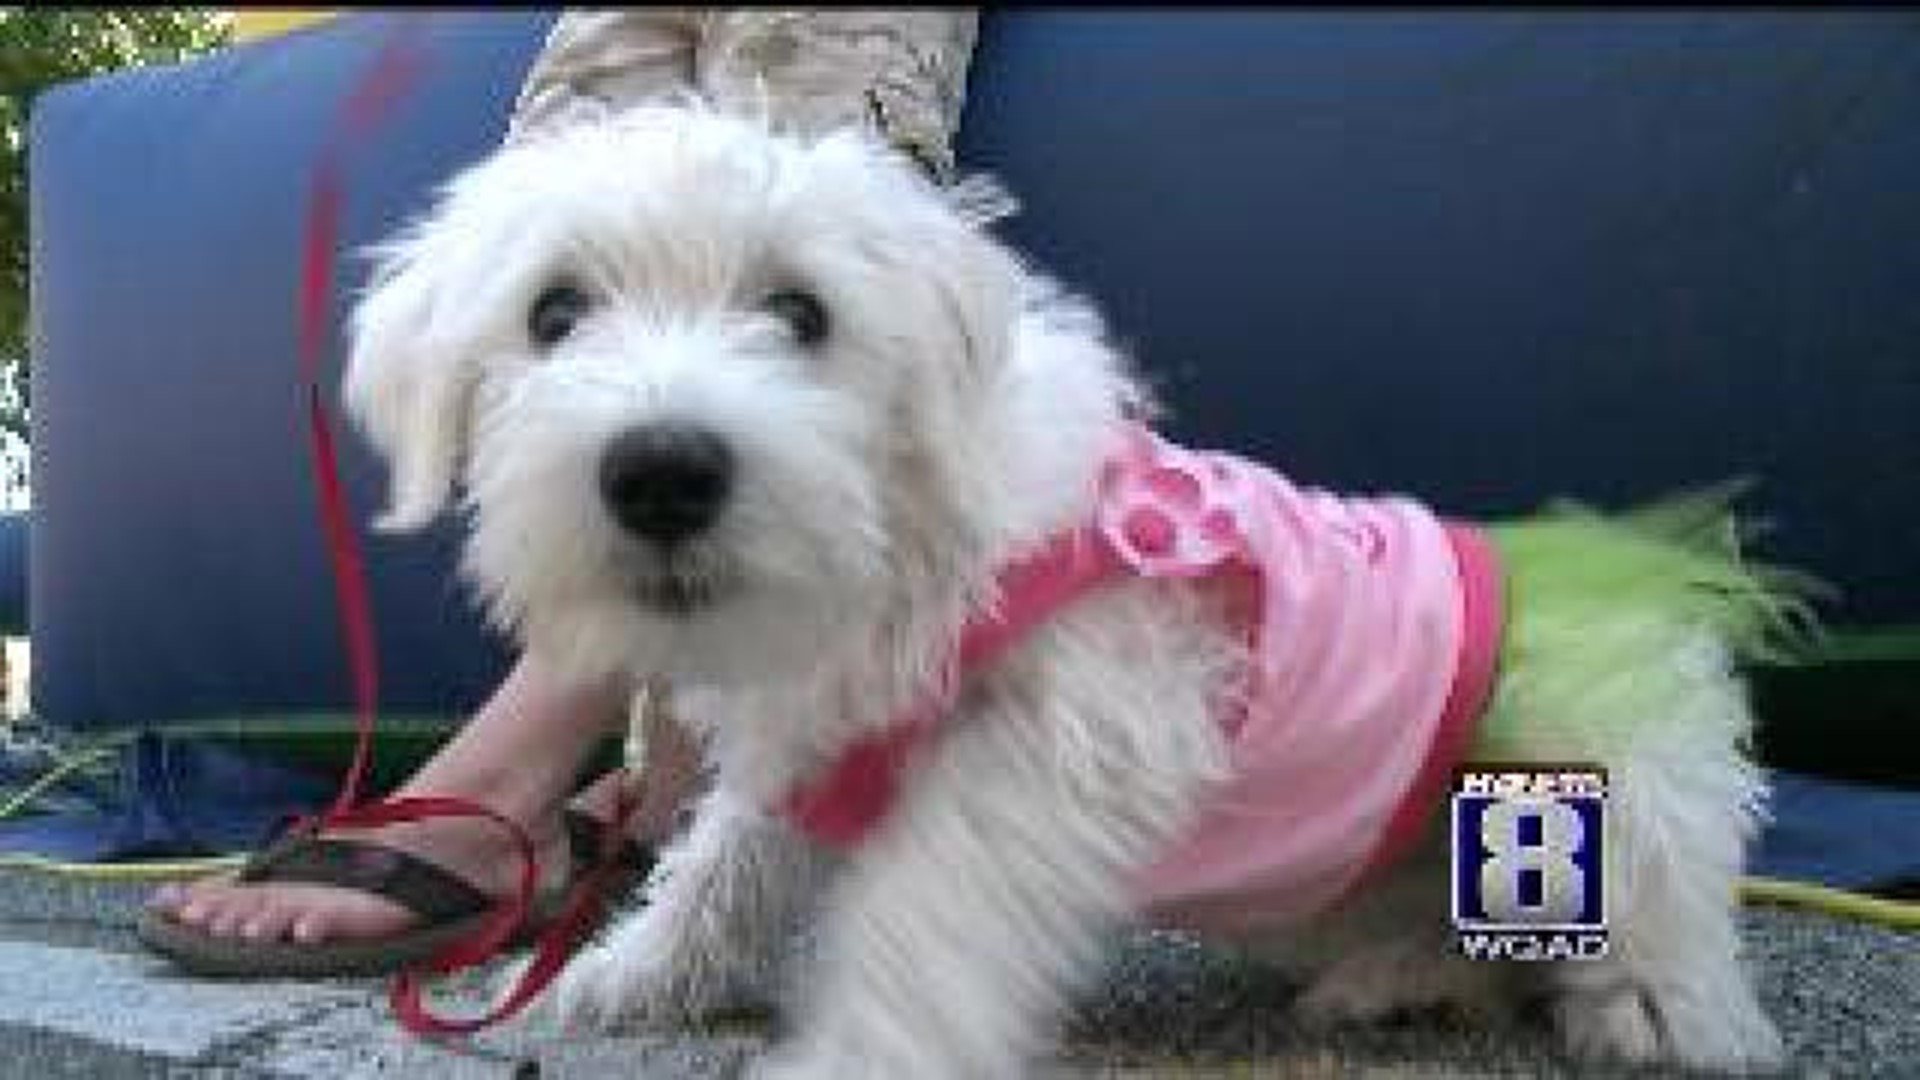 Kindness shown to dogs on hot day